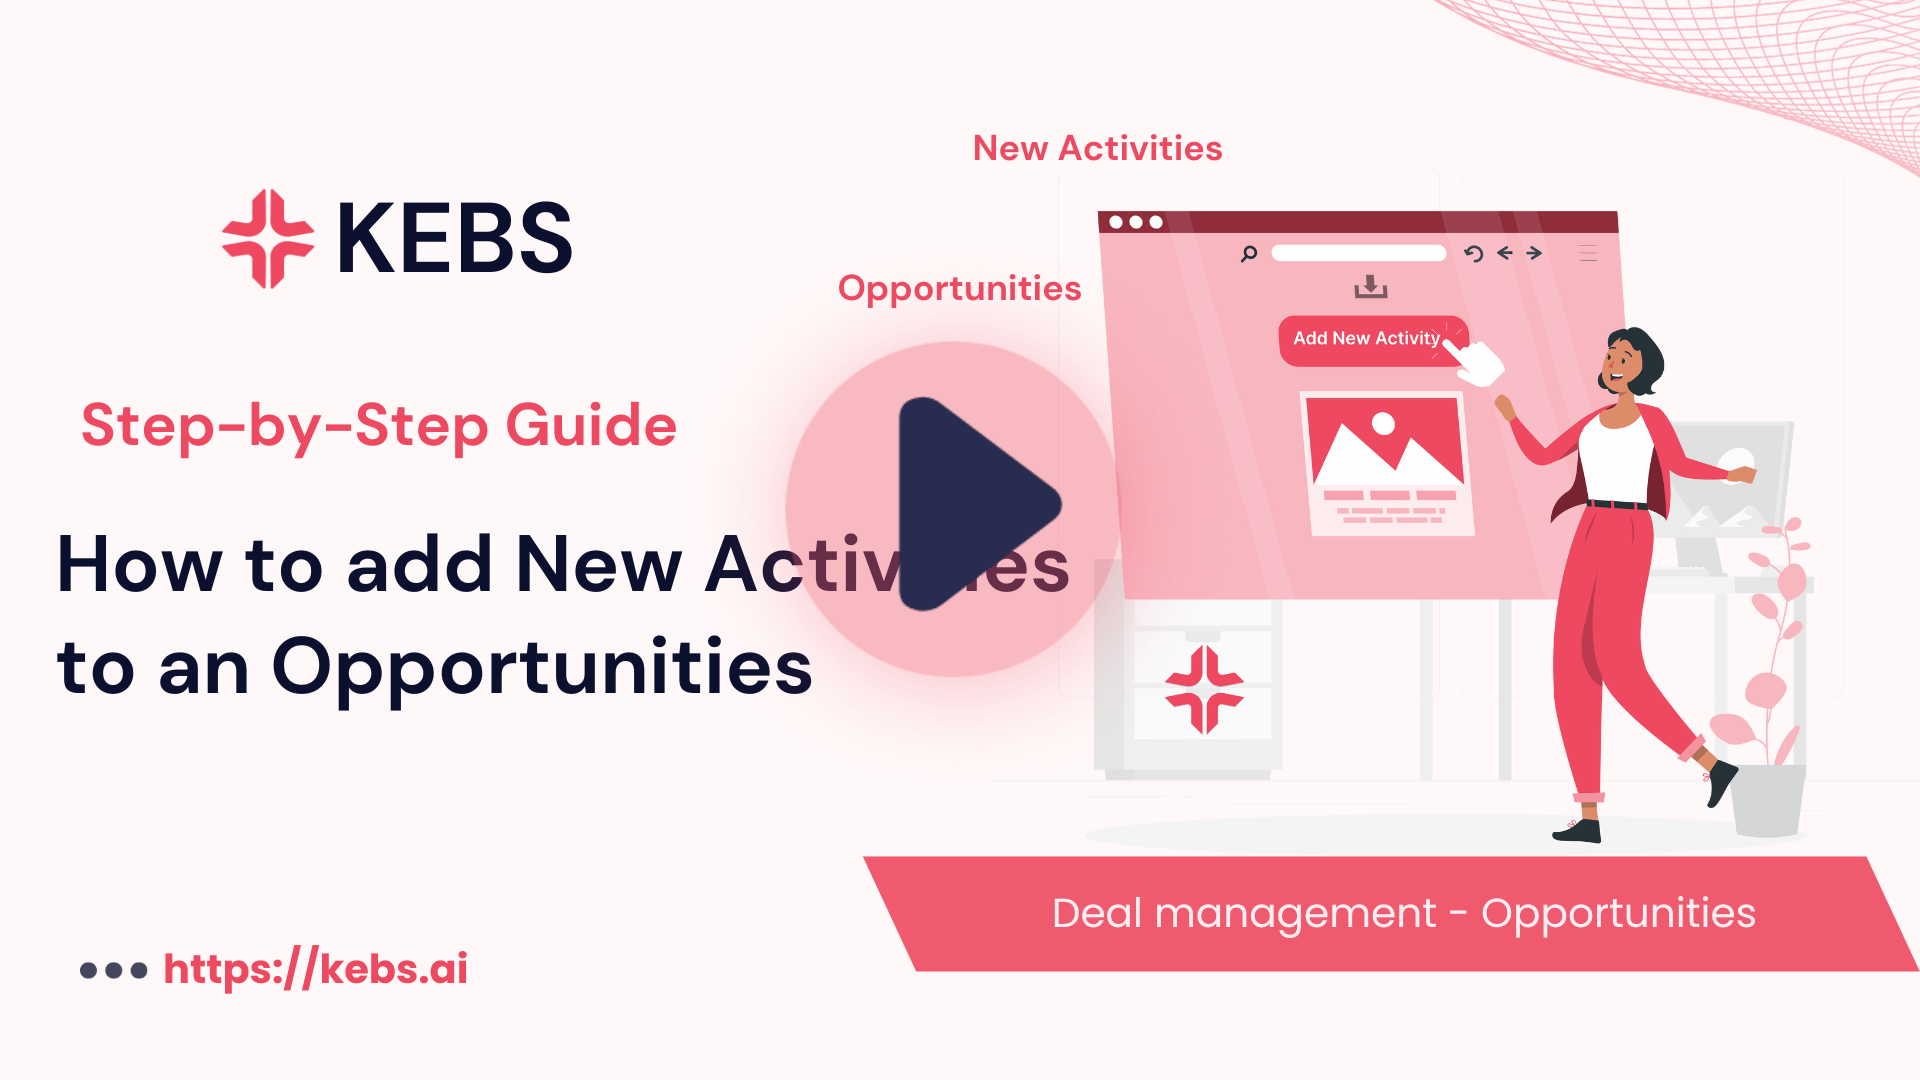 How to add New Activities to an Opportunities